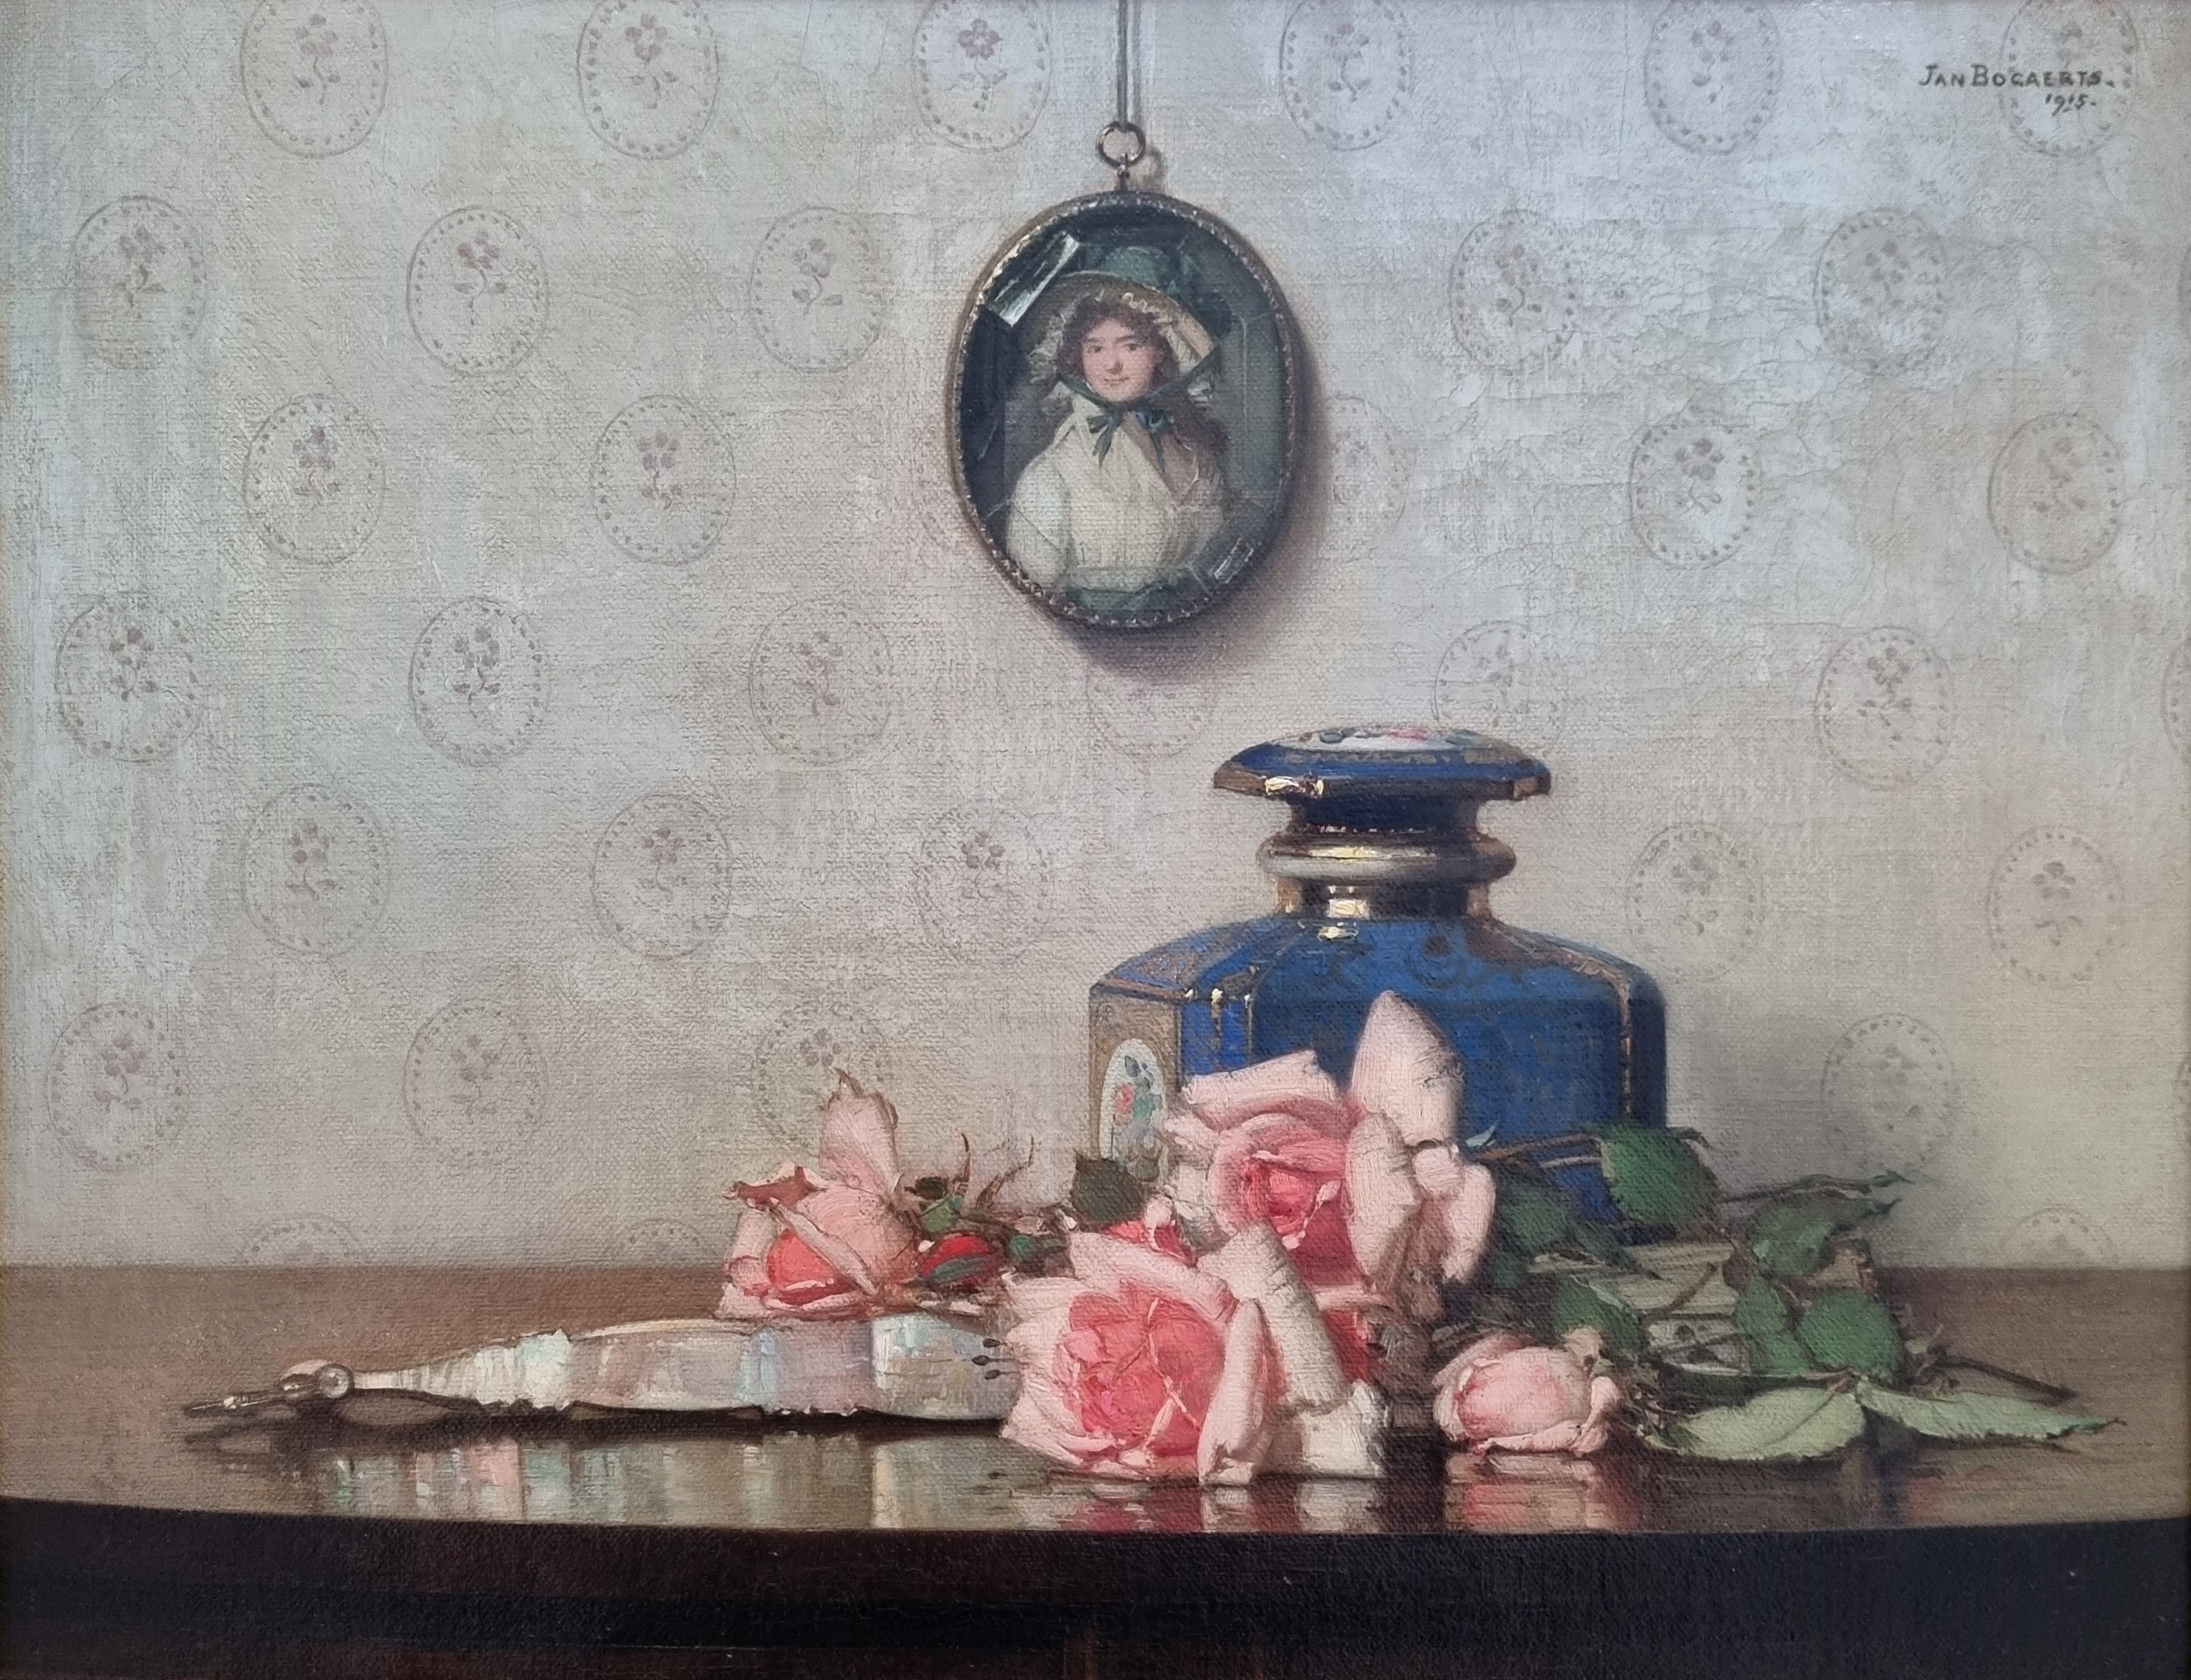 Stilleven / An elegant still life of a blue bottle, roses, with a miniature hanging on the wall